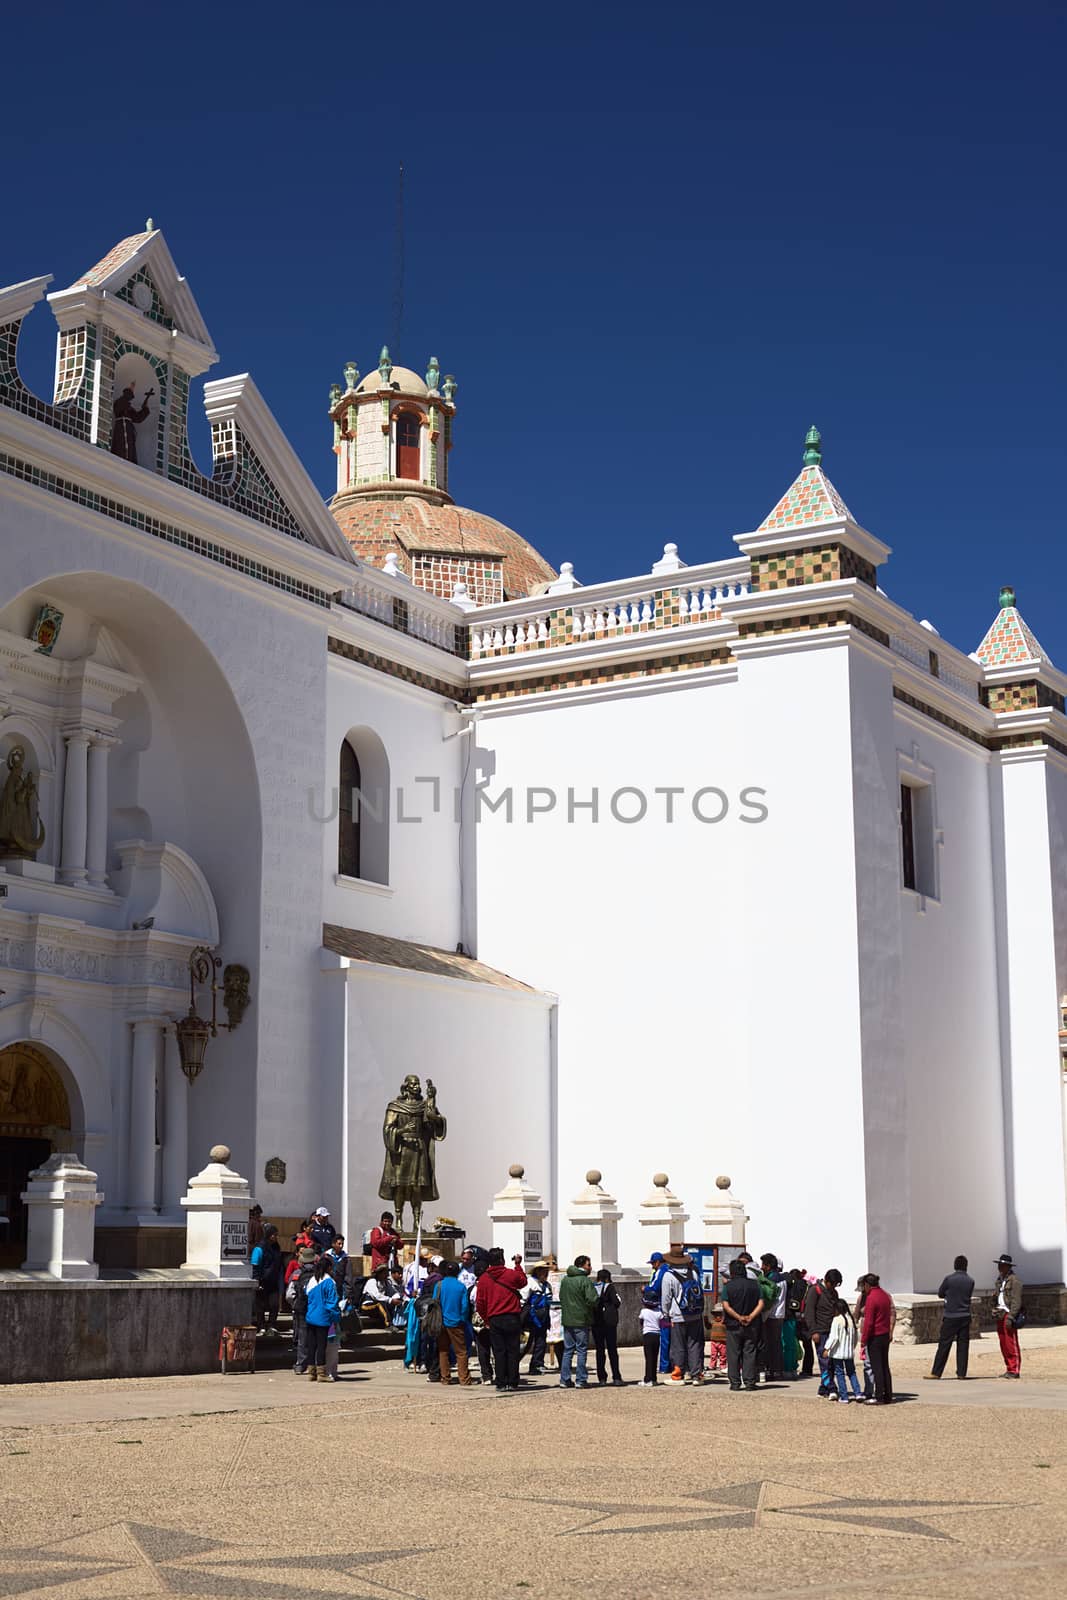 COPACABANA, BOLIVIA - OCTOBER 18, 2014: Unidentified people at the entrance of the Basilica of Our Lady of Copacabana in the small tourist town along the Titicaca Lake on October 18, 2014 in Copacabana, Bolivia 